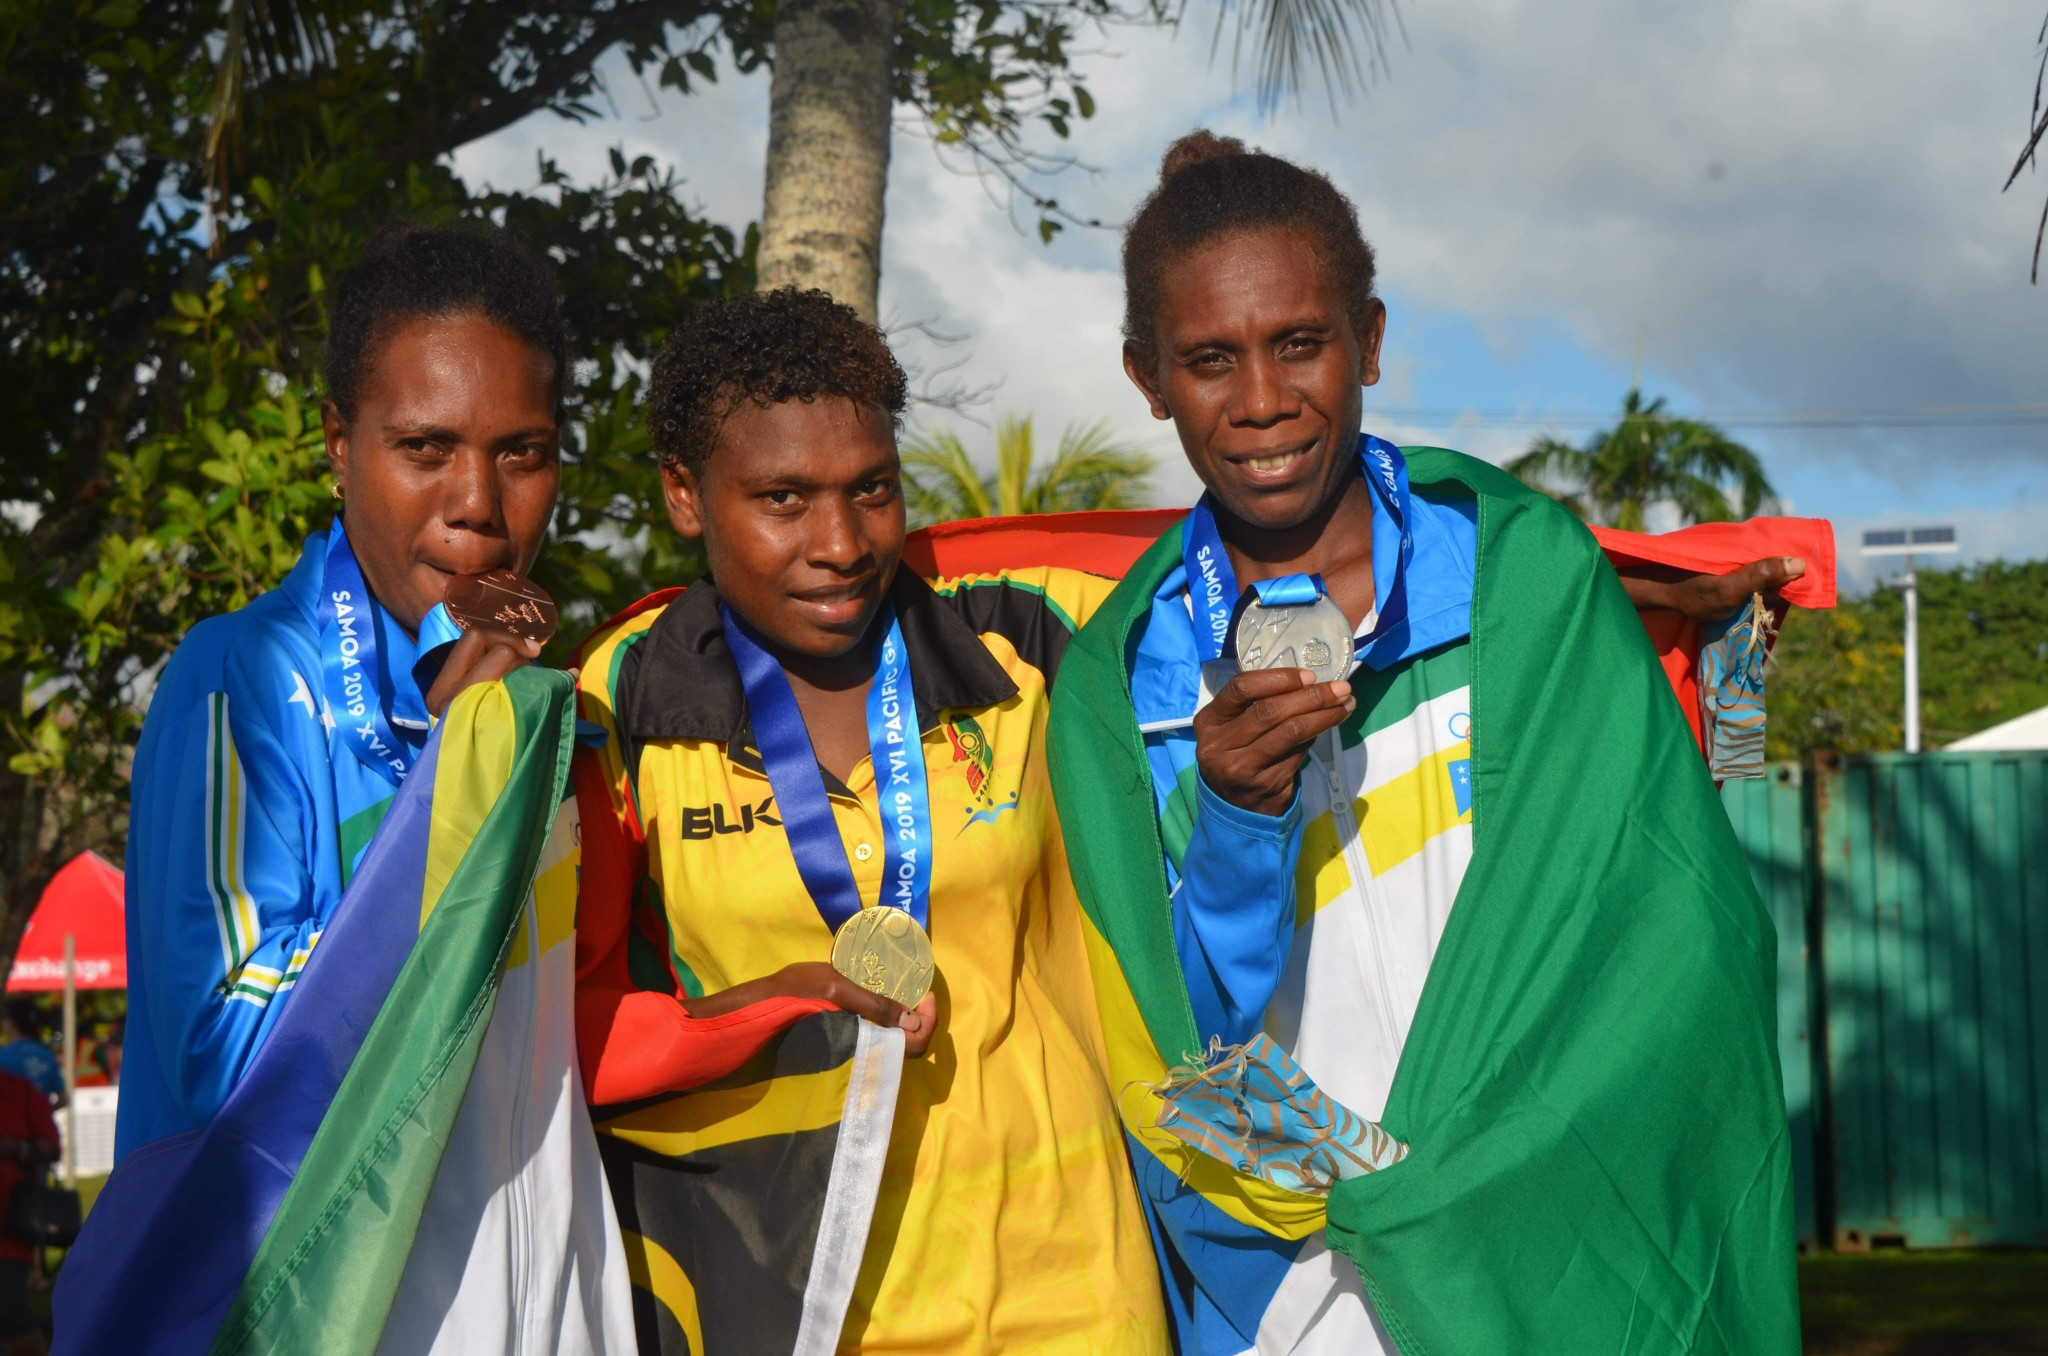 Dianah Matekali and Solomon Islands team mate Sharon Firisua claimed silver and bronze respectively ©Games News Service